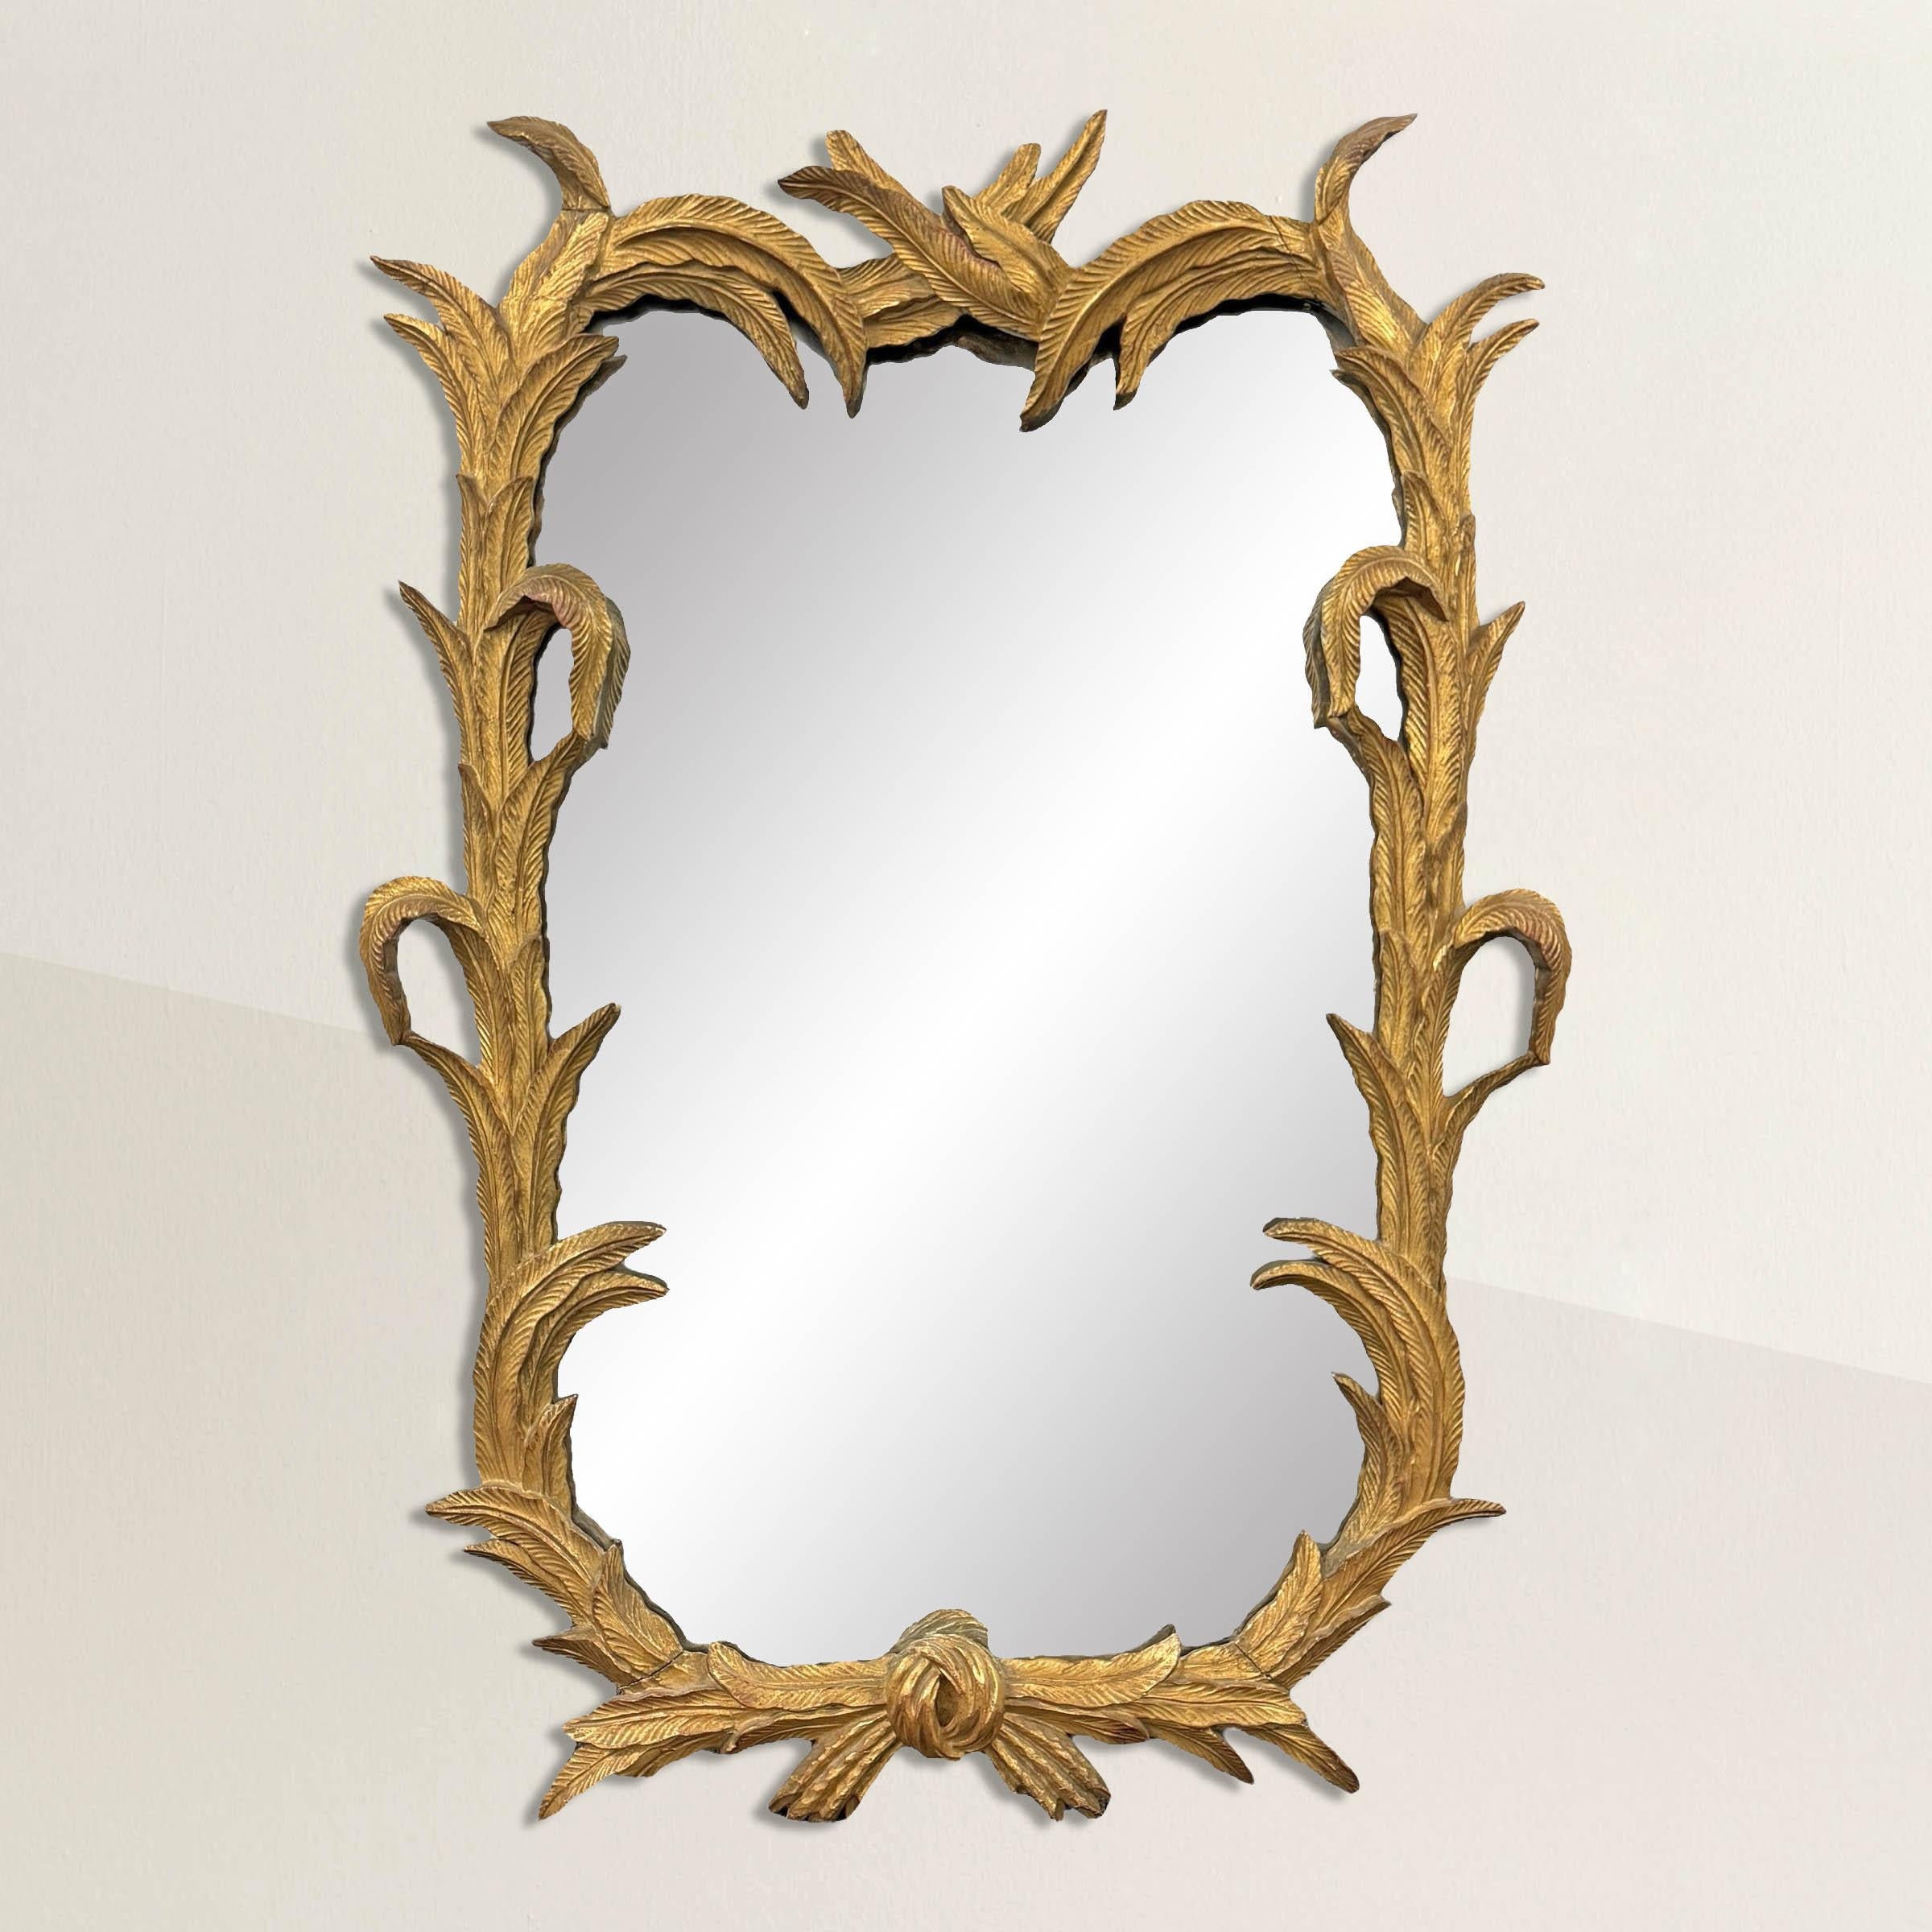 This early 20th-century Italian carved and gilt wood framed mirror is a masterpiece of artisanal craftsmanship, boasting an intricate and enchanting design. The frame is a symphony of detail, with dozens of stylized feathers meticulously carved and